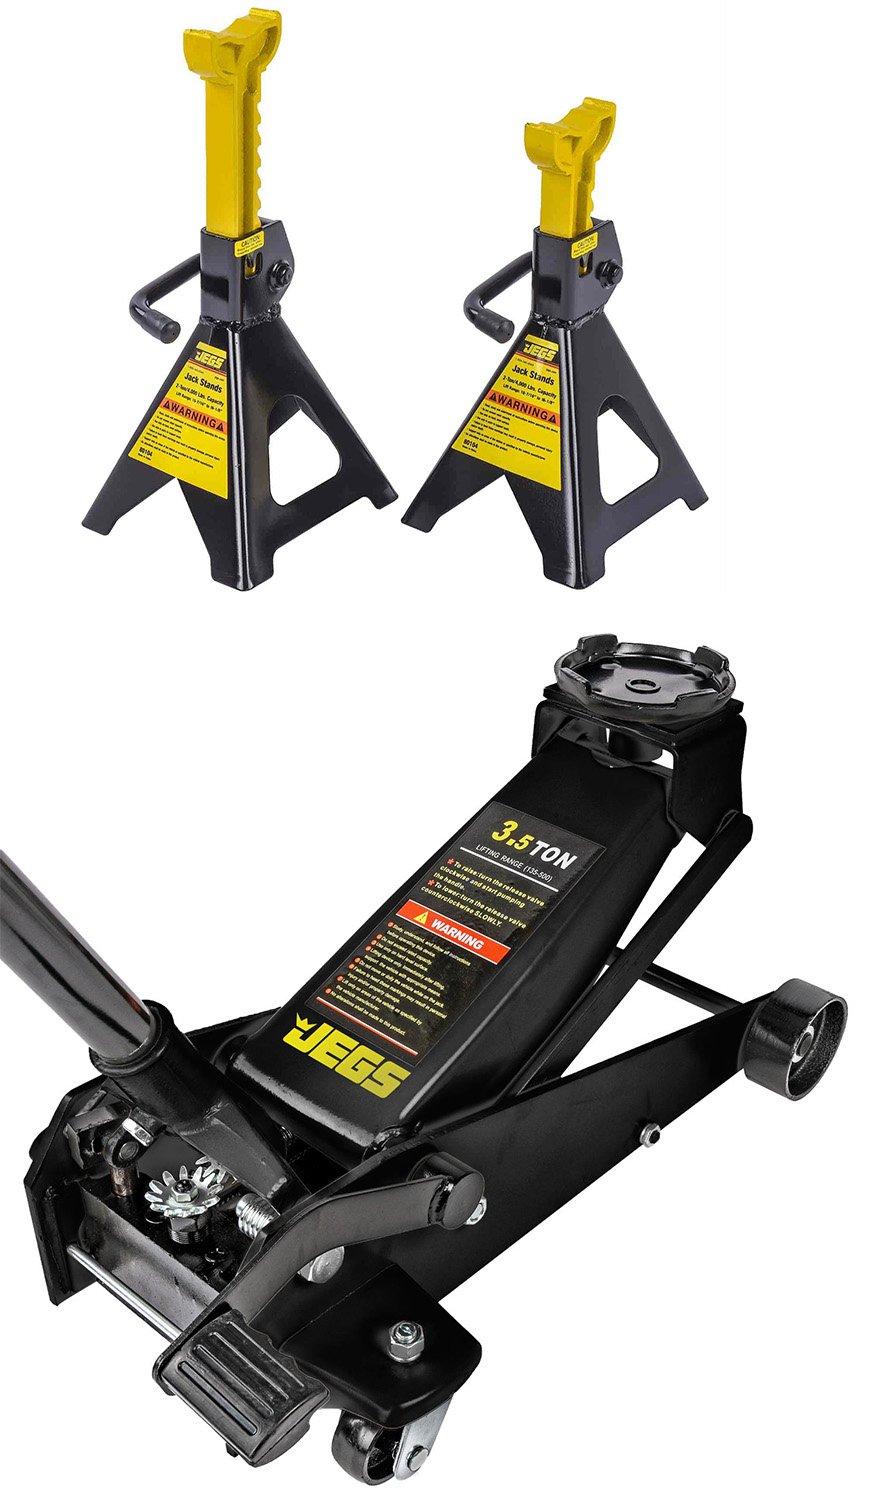 Quick Lift Floor Jack and Jack Stands Kit